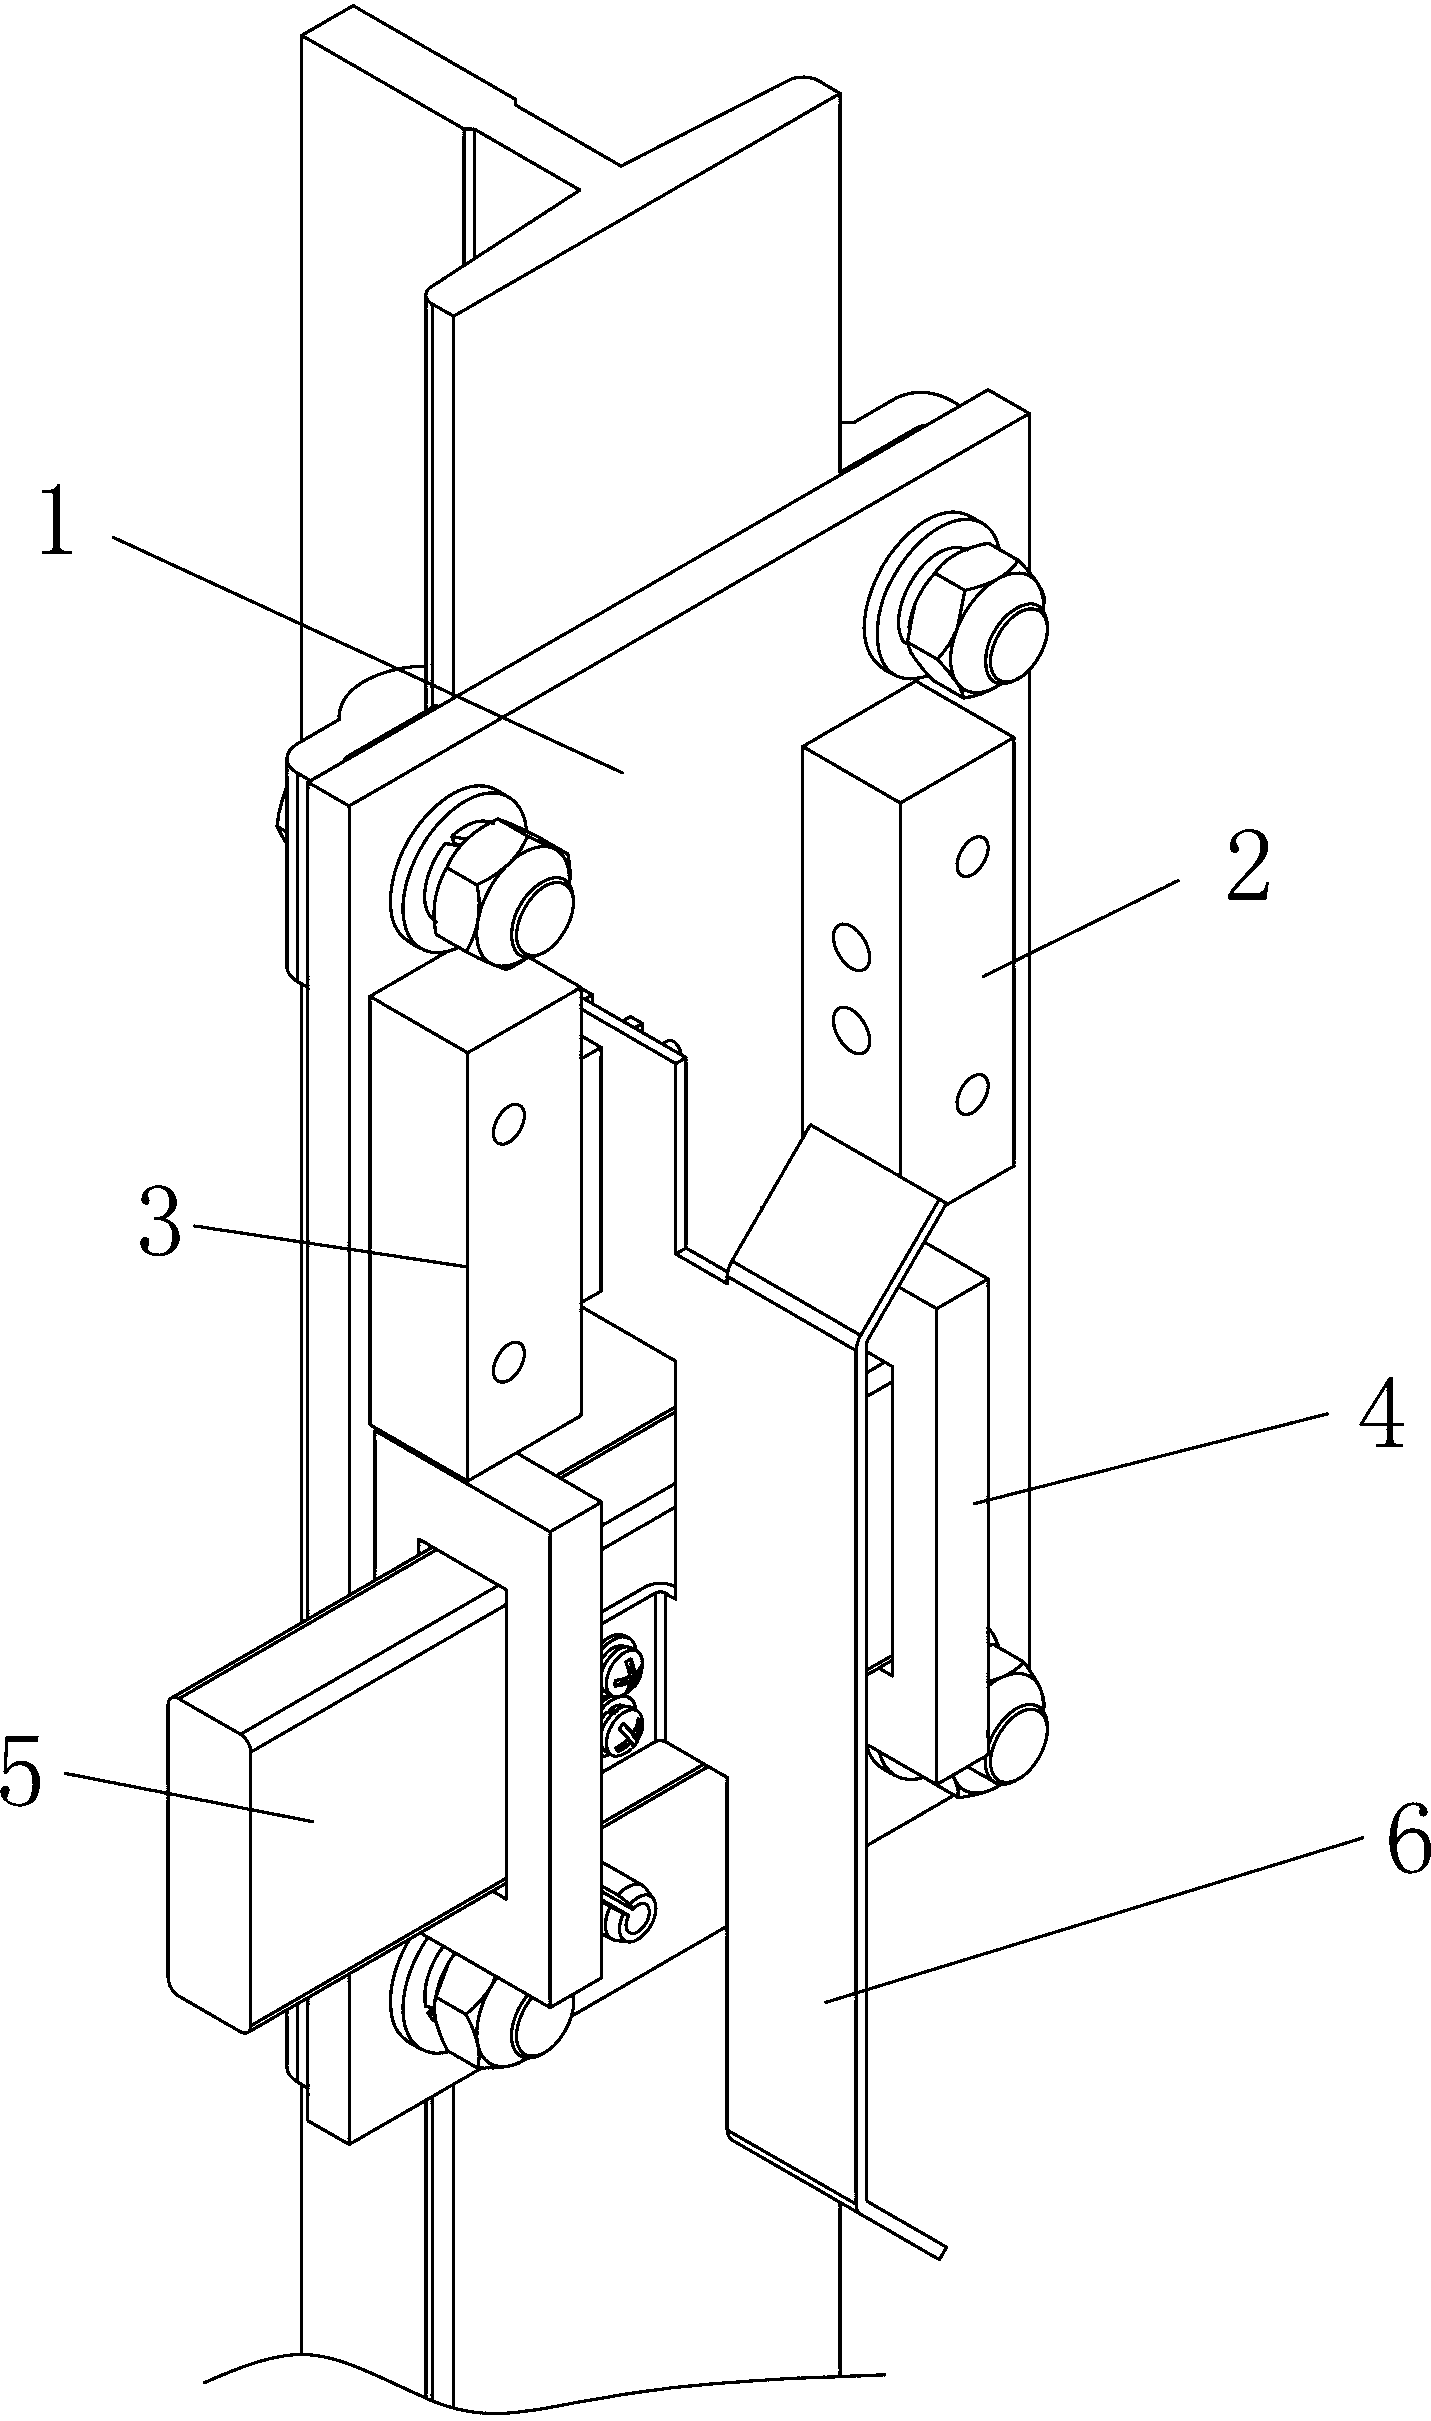 Mechanical stopping device for home elevator